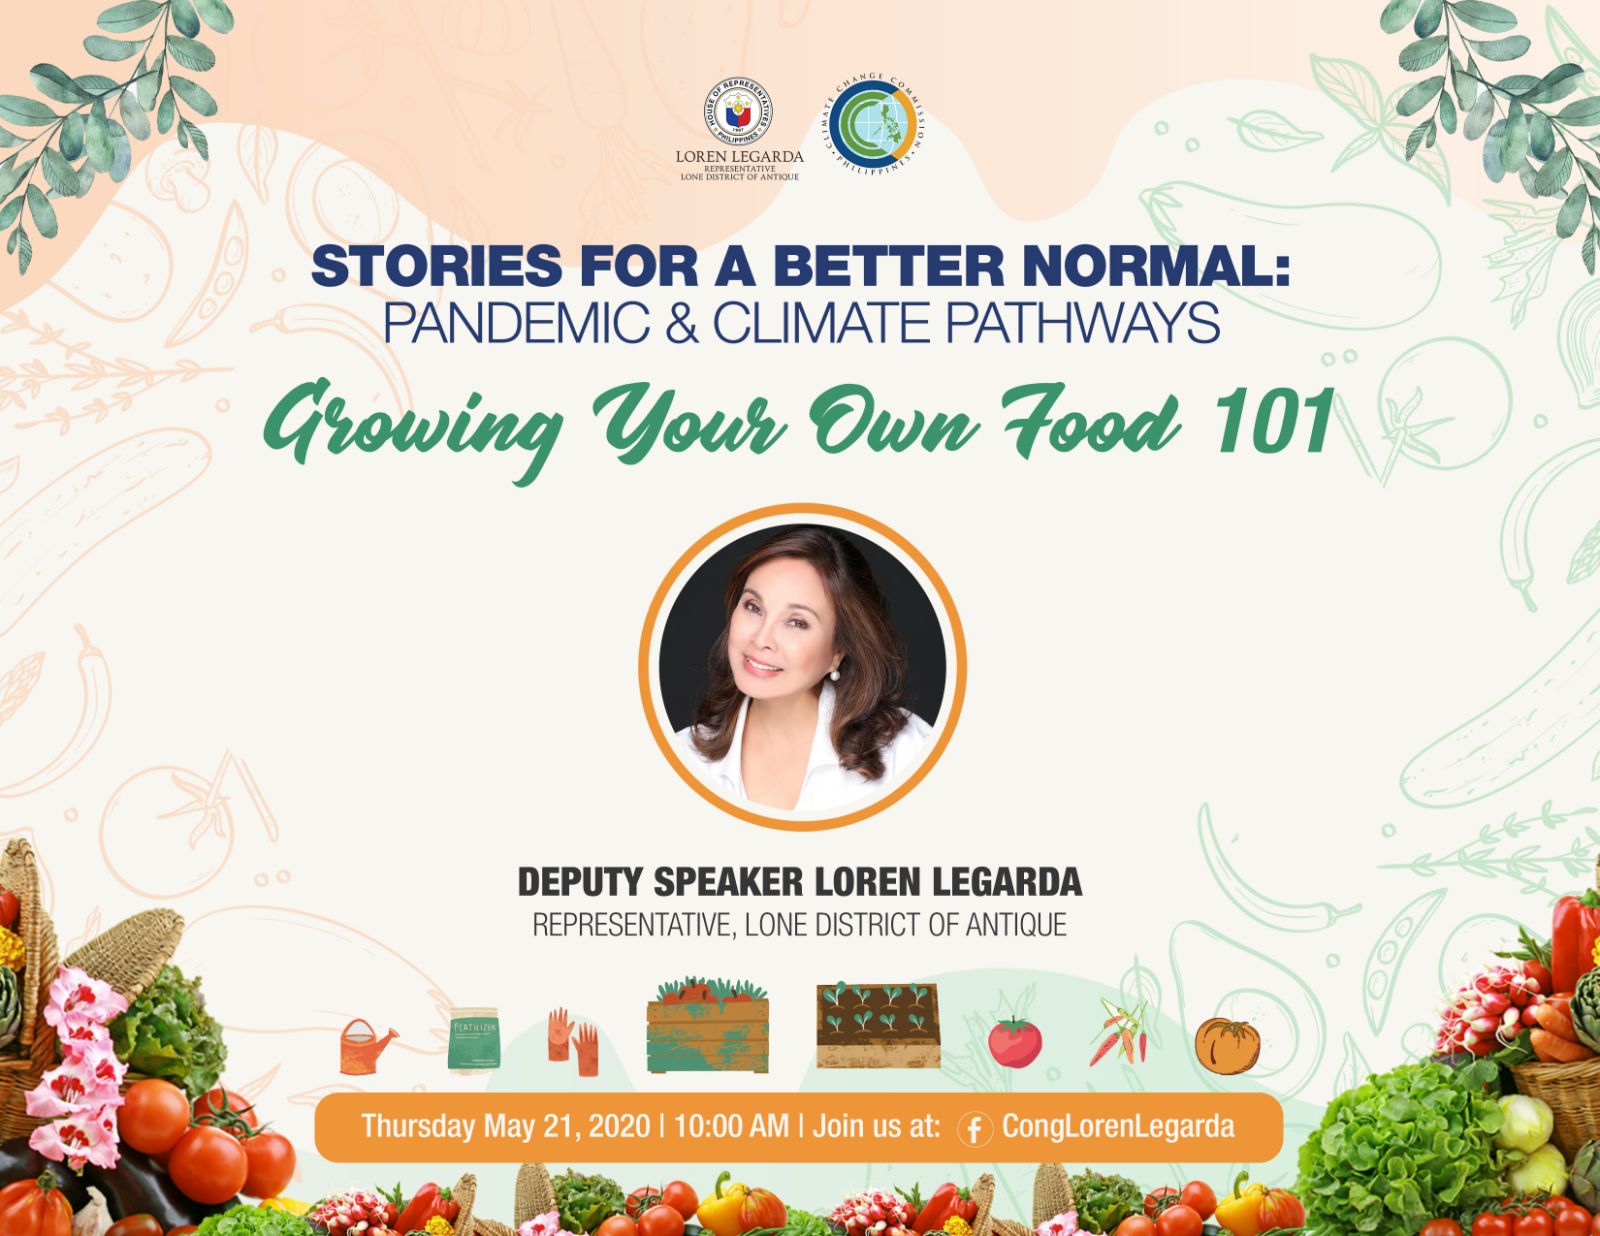 Stories for a Better Normal: Pandemic and Climate Pathways — A morning conversation on "Growing Your Own Food 101"